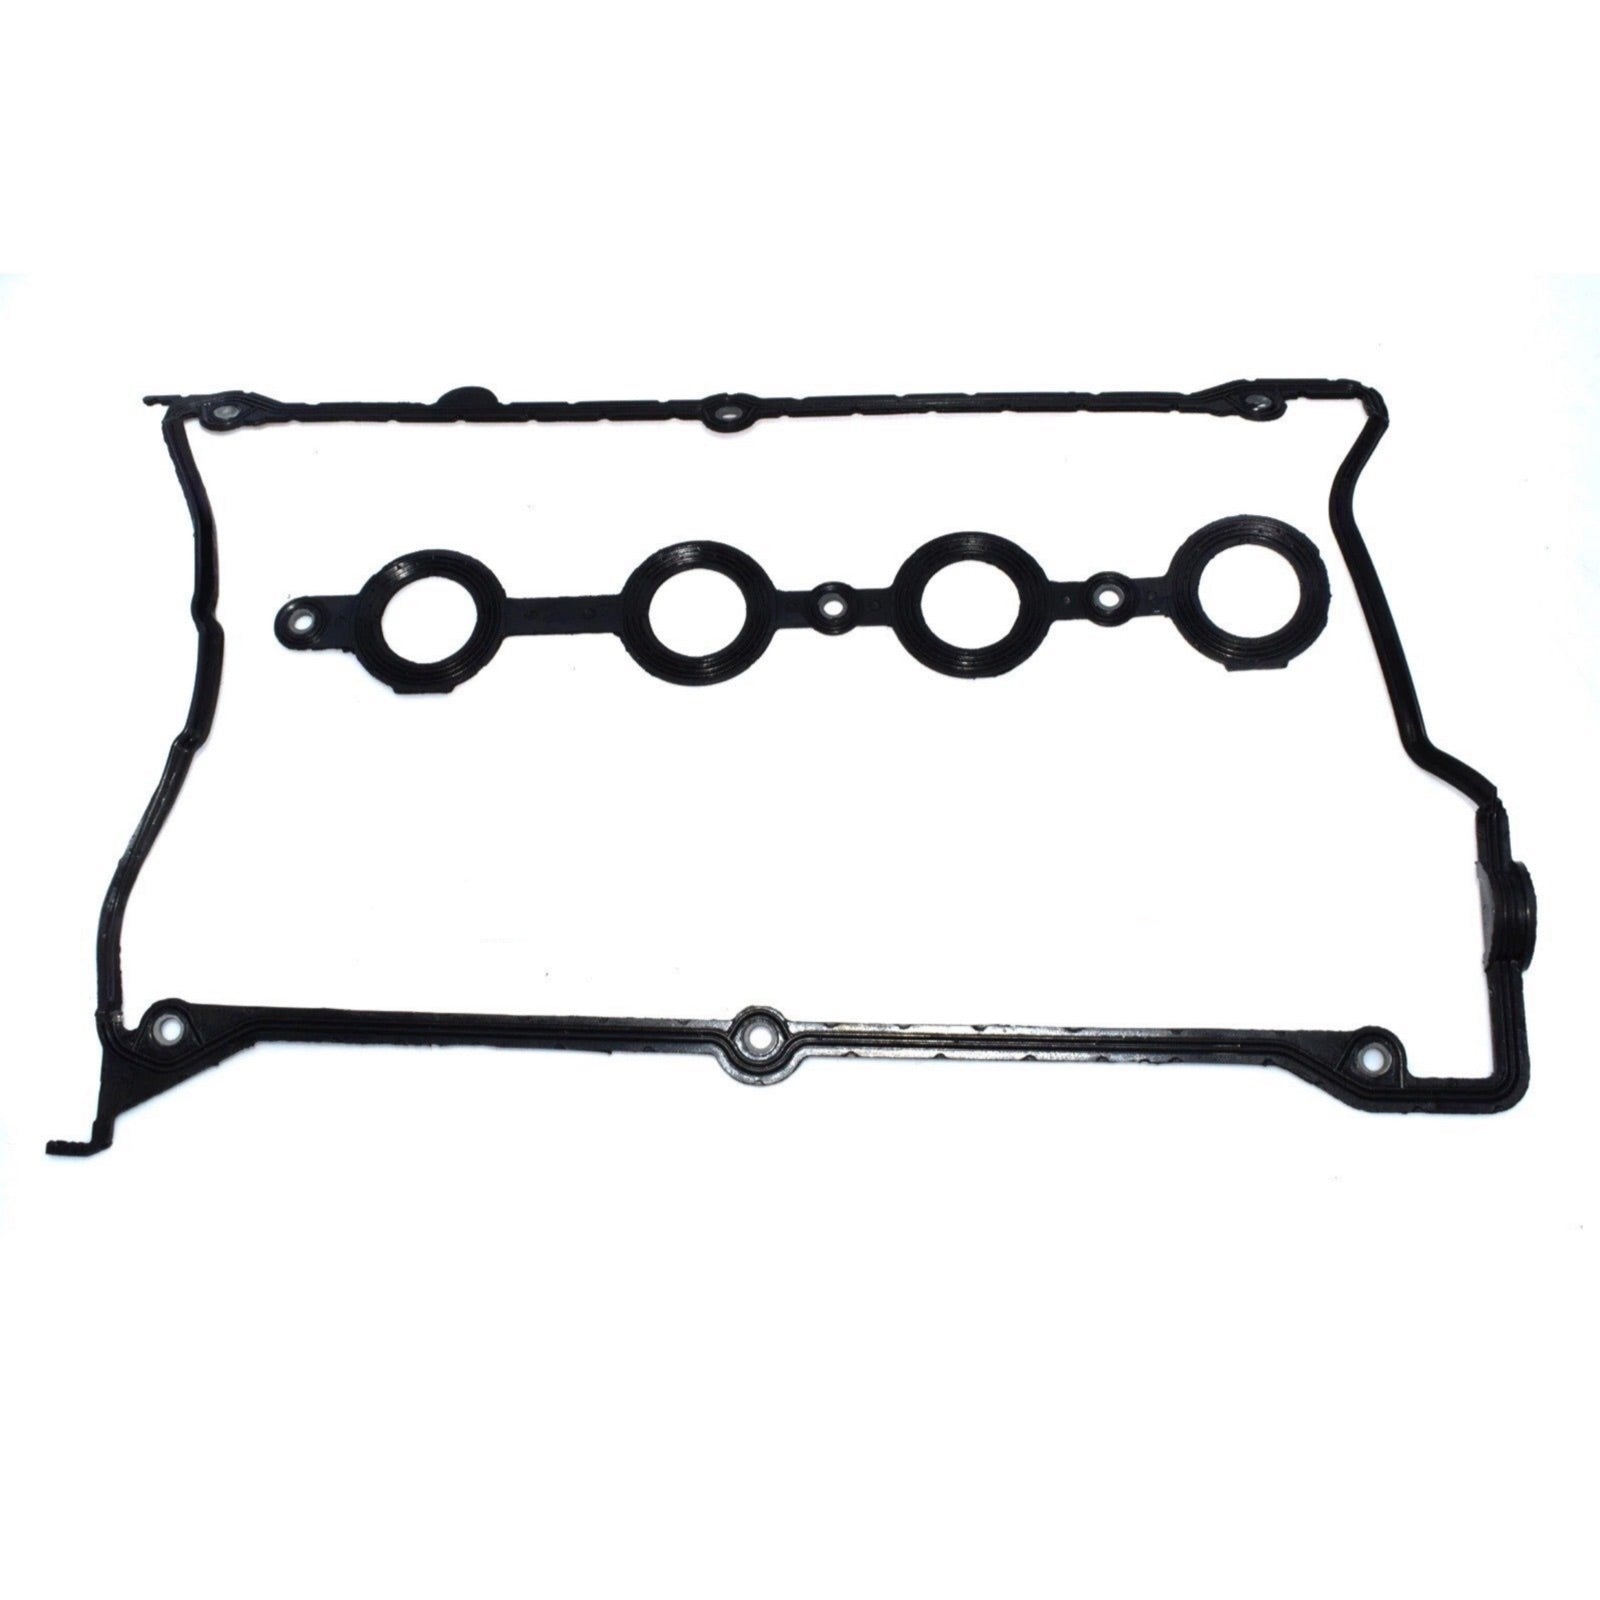 Engine Valve Cover Gasket & Chain Tensioner Set For VW Passat B5 Golf Jetta For Audi A4 TT 1.8T 058198025A